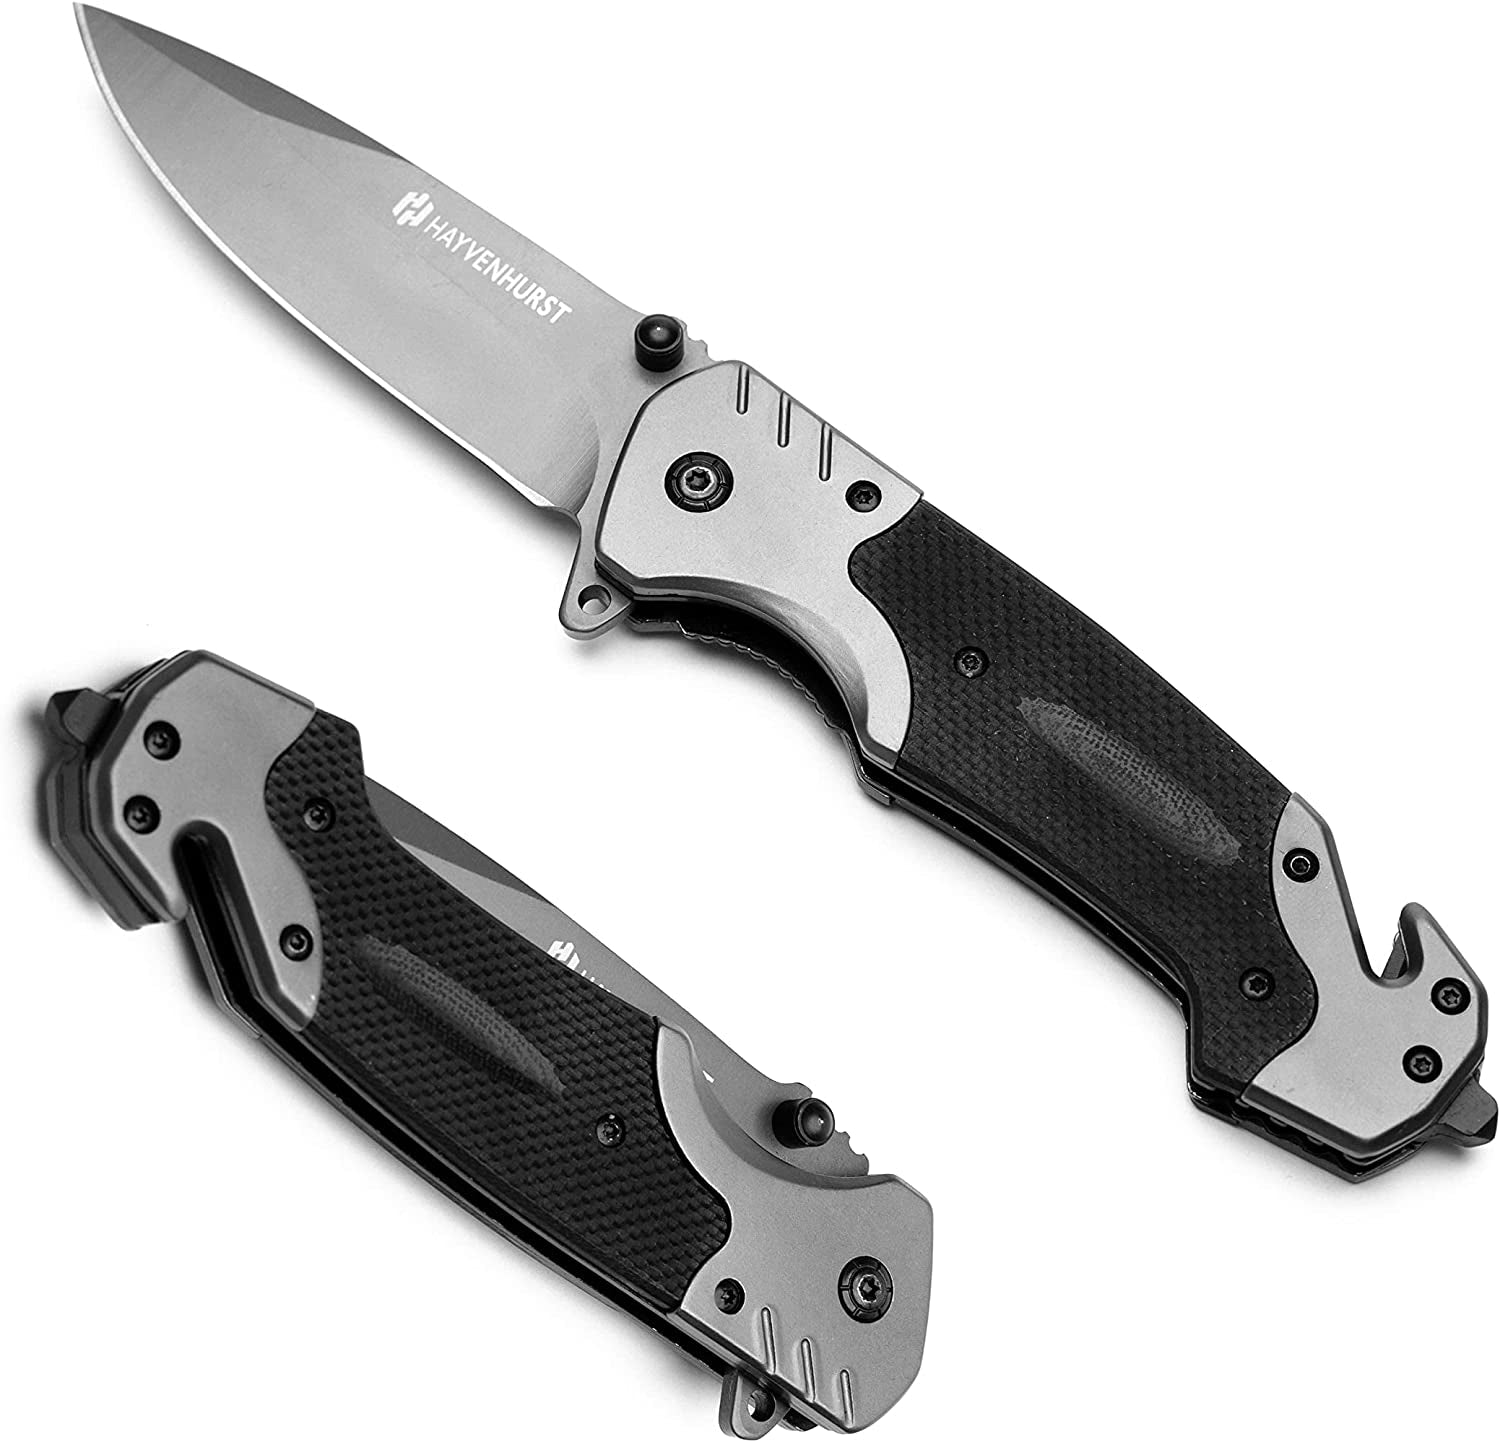 Tactical Knife - Folding Knife - EDC Knife - Pocket Knife for Men with Pointed Stainless Steel Blade and Aluminium Handle - Everyday Carry Knife with Pocketclip, Bottle Opener